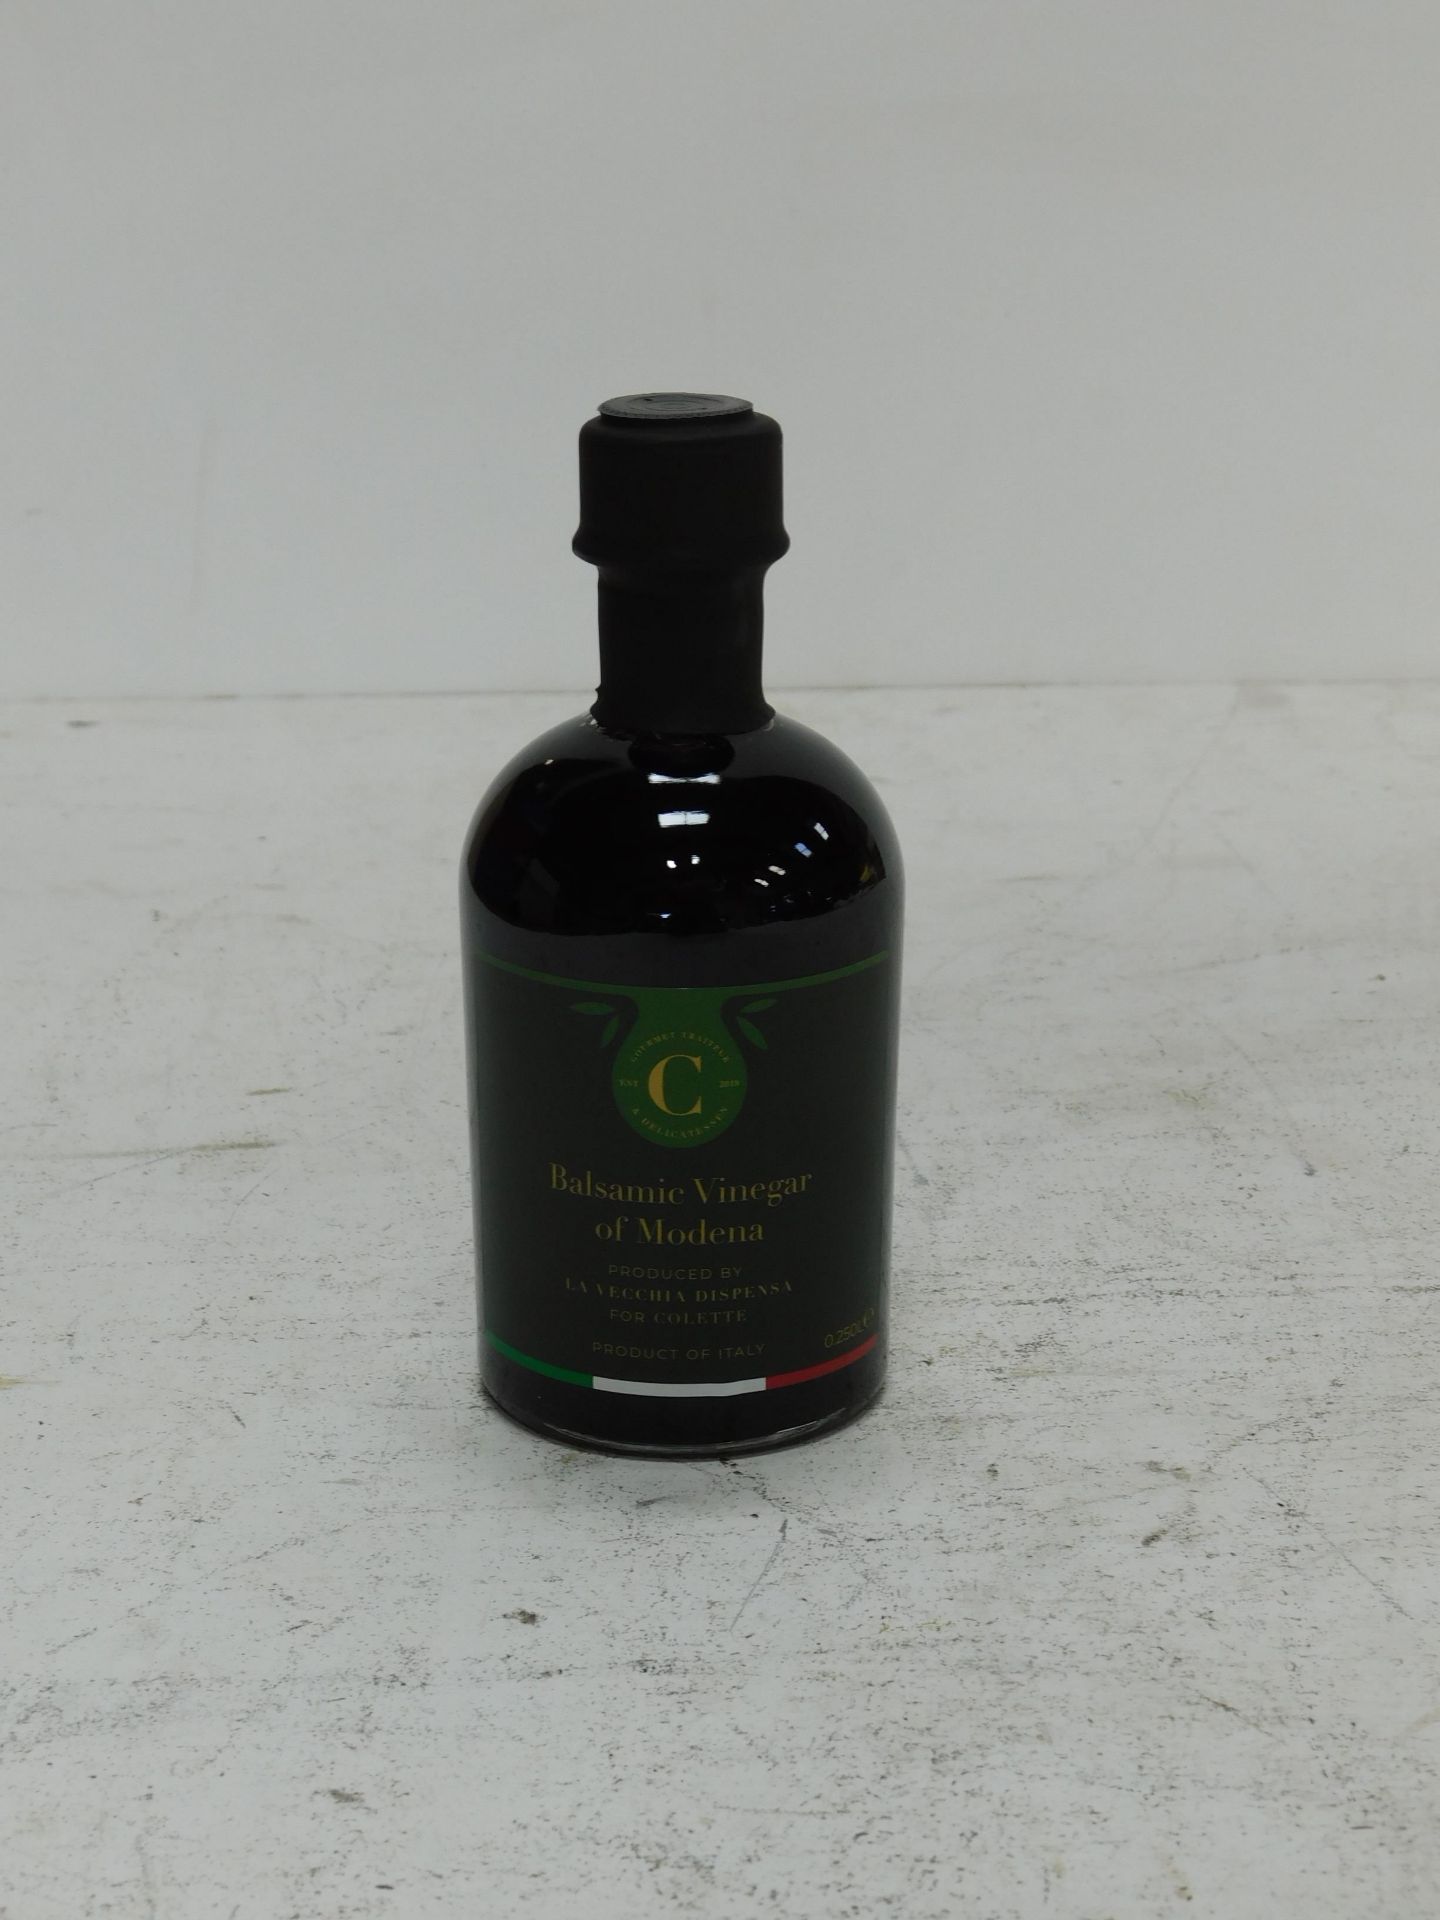 36 Colette Balsamic Vinegar of Modena 250ml (Location: Brentwood. Please Refer to General Notes)